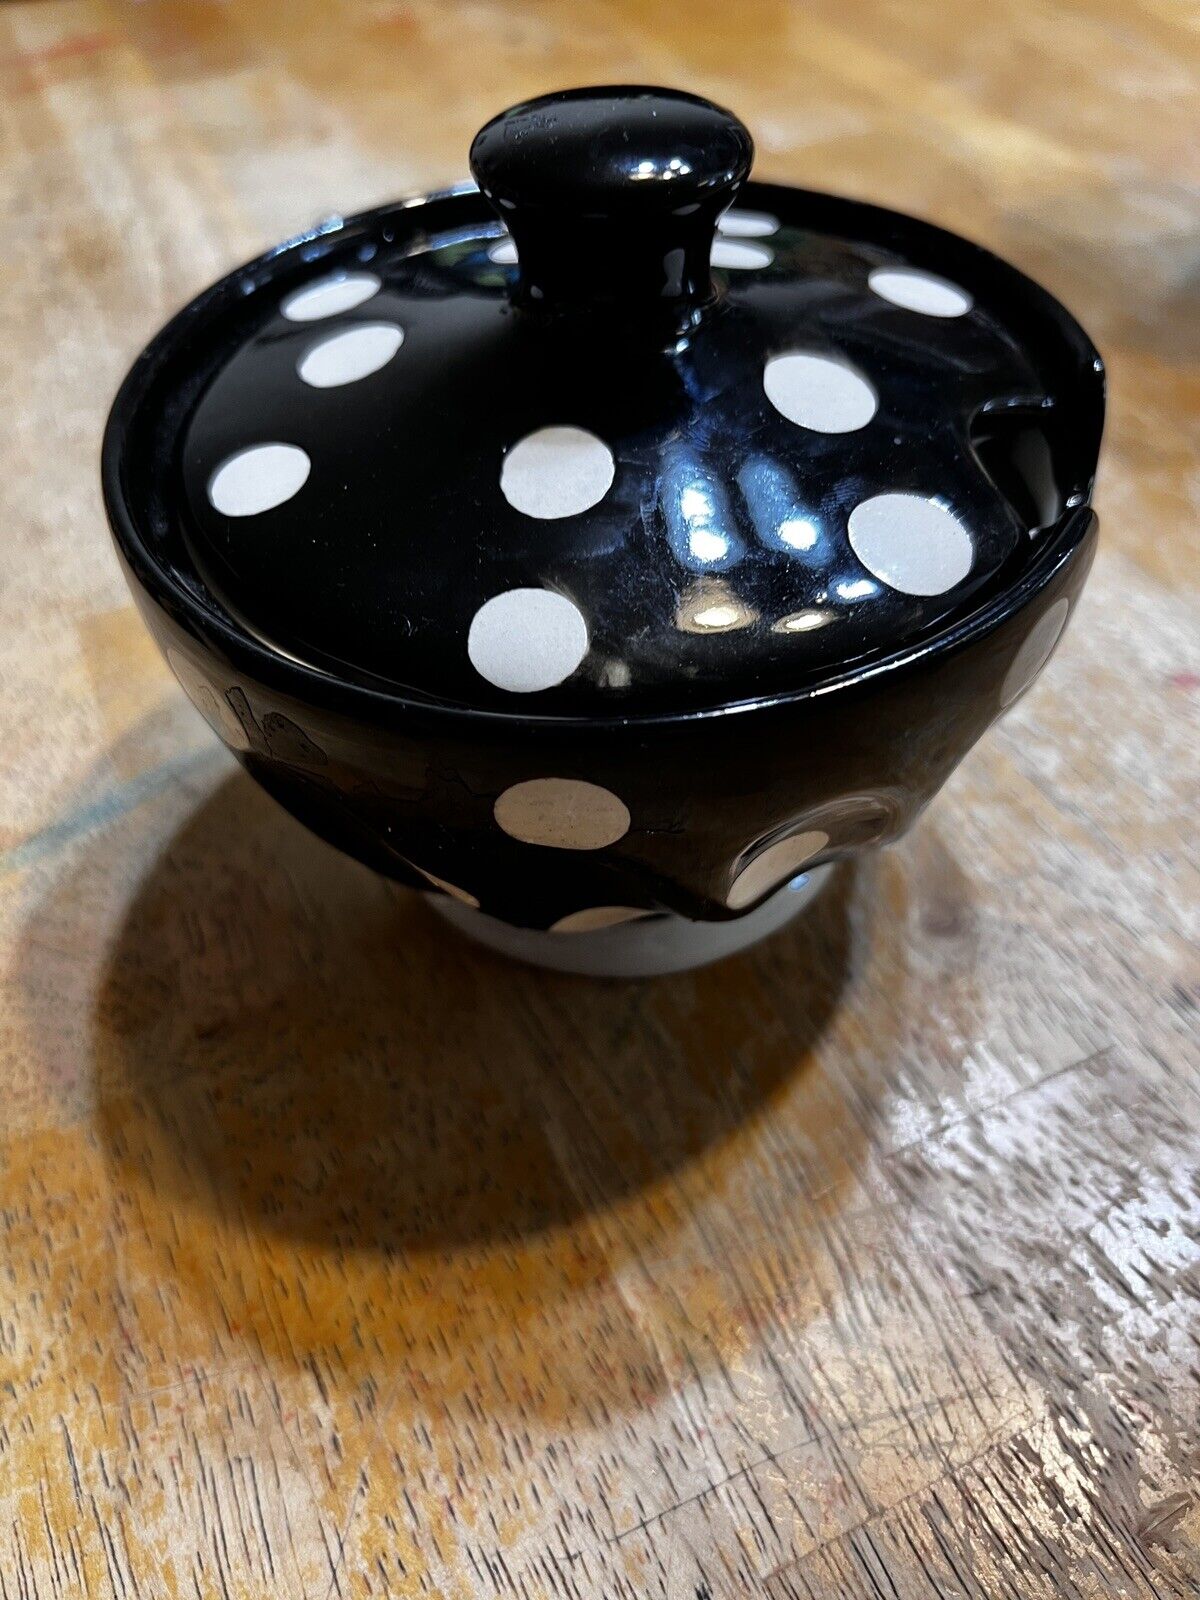 EUC Black & white Polka Dot Sugar Bowl With Lid~Global Design Connections. Cute